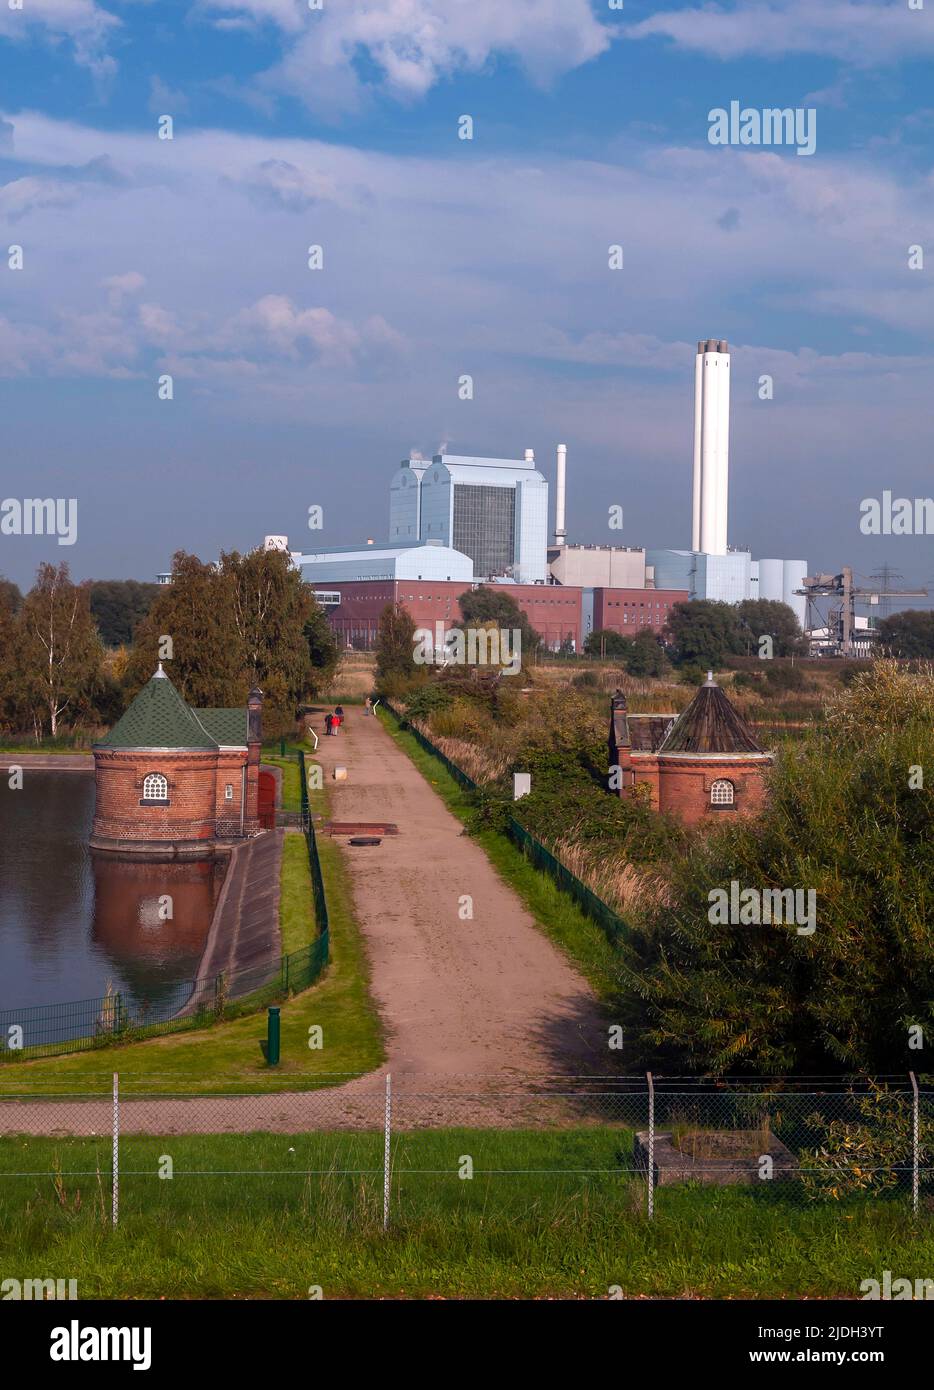 Island Kaltehofe in front and Tiefstack power station in the background, Germany, Hamburg Stock Photo